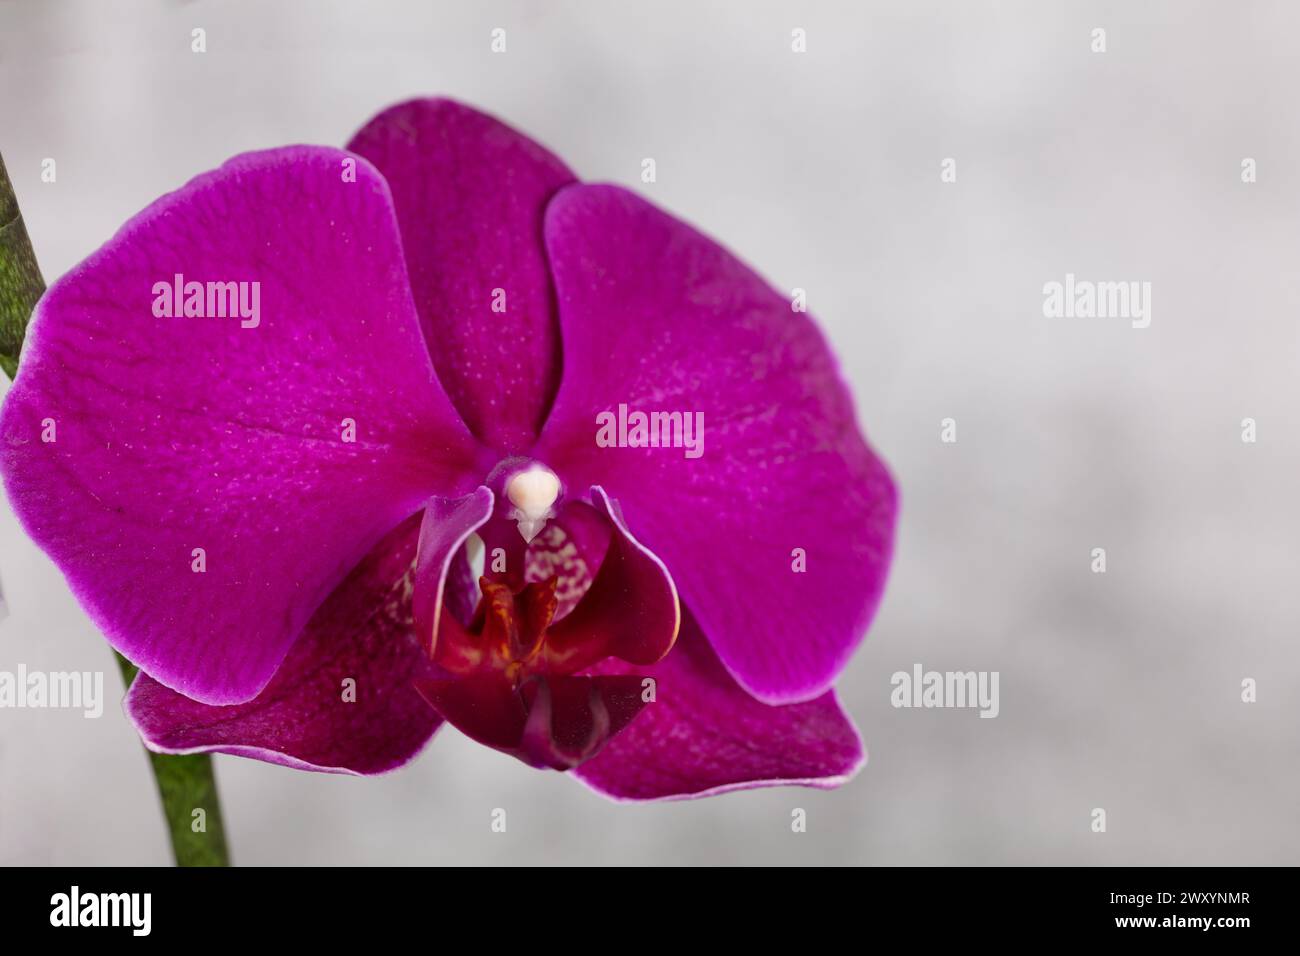 Close up detailed photograph of one singular purple Phalaenopis flower heads against a mottled out of focus grey/white background landscape format Stock Photo